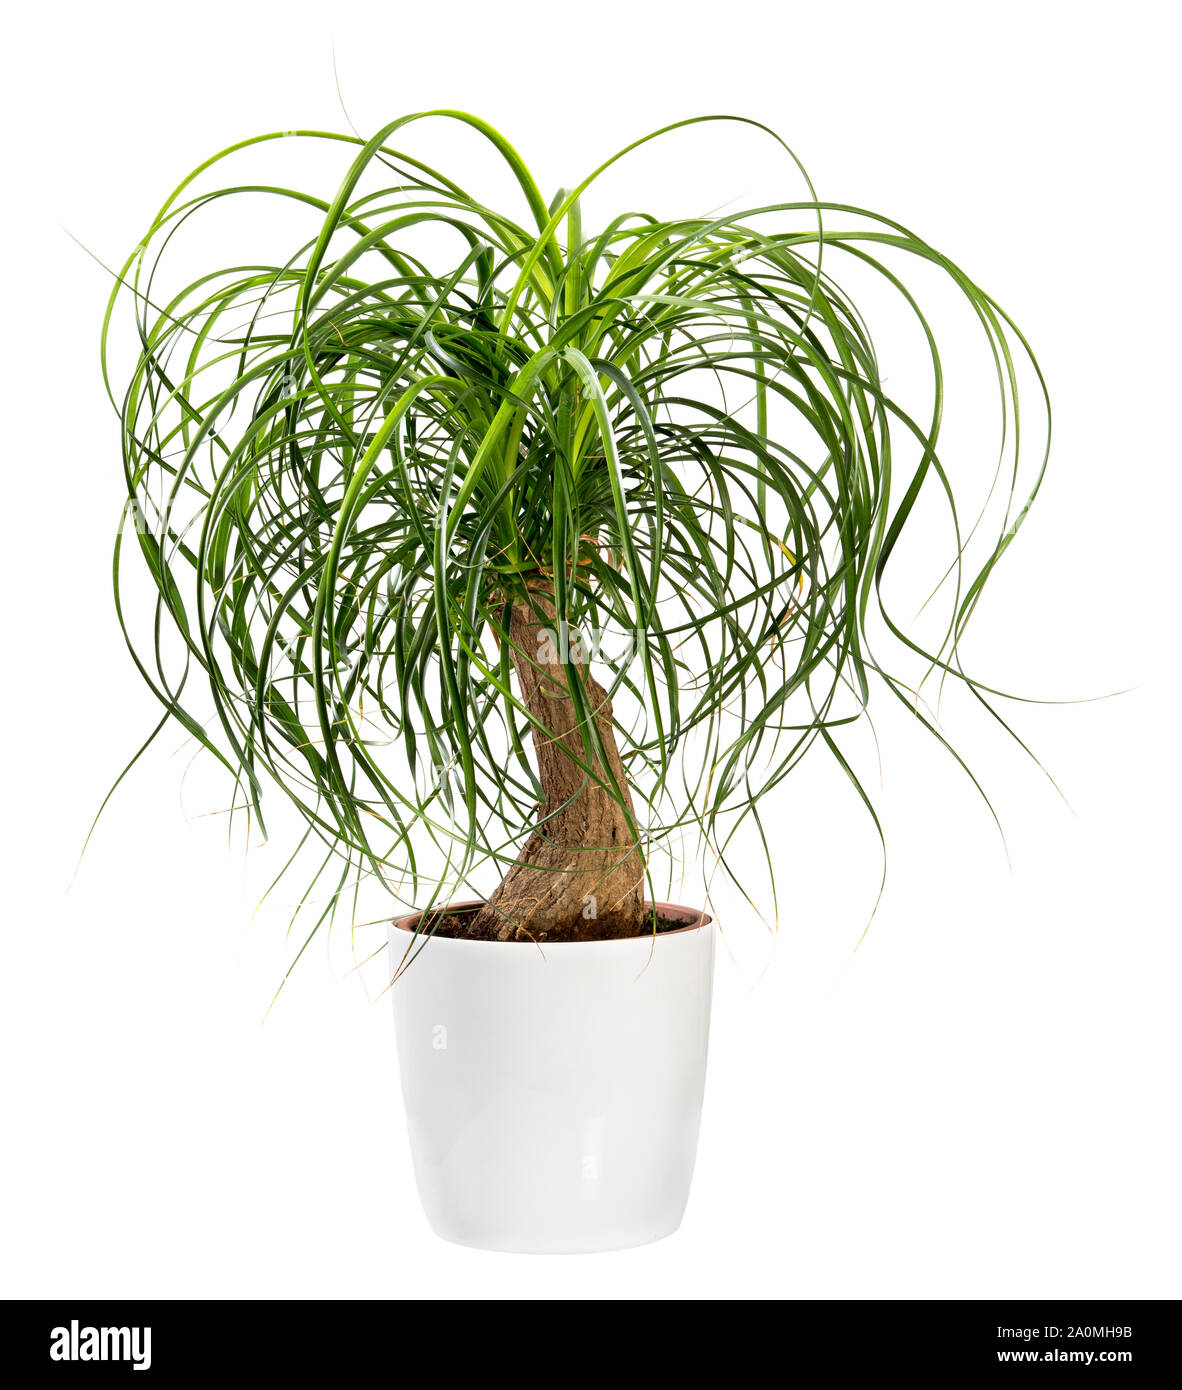 Beaucarnea recurvata or Nolina recurvata plant, otherwise called the Ponytail Palm, potted in a large white tub isolated on white Stock Photo